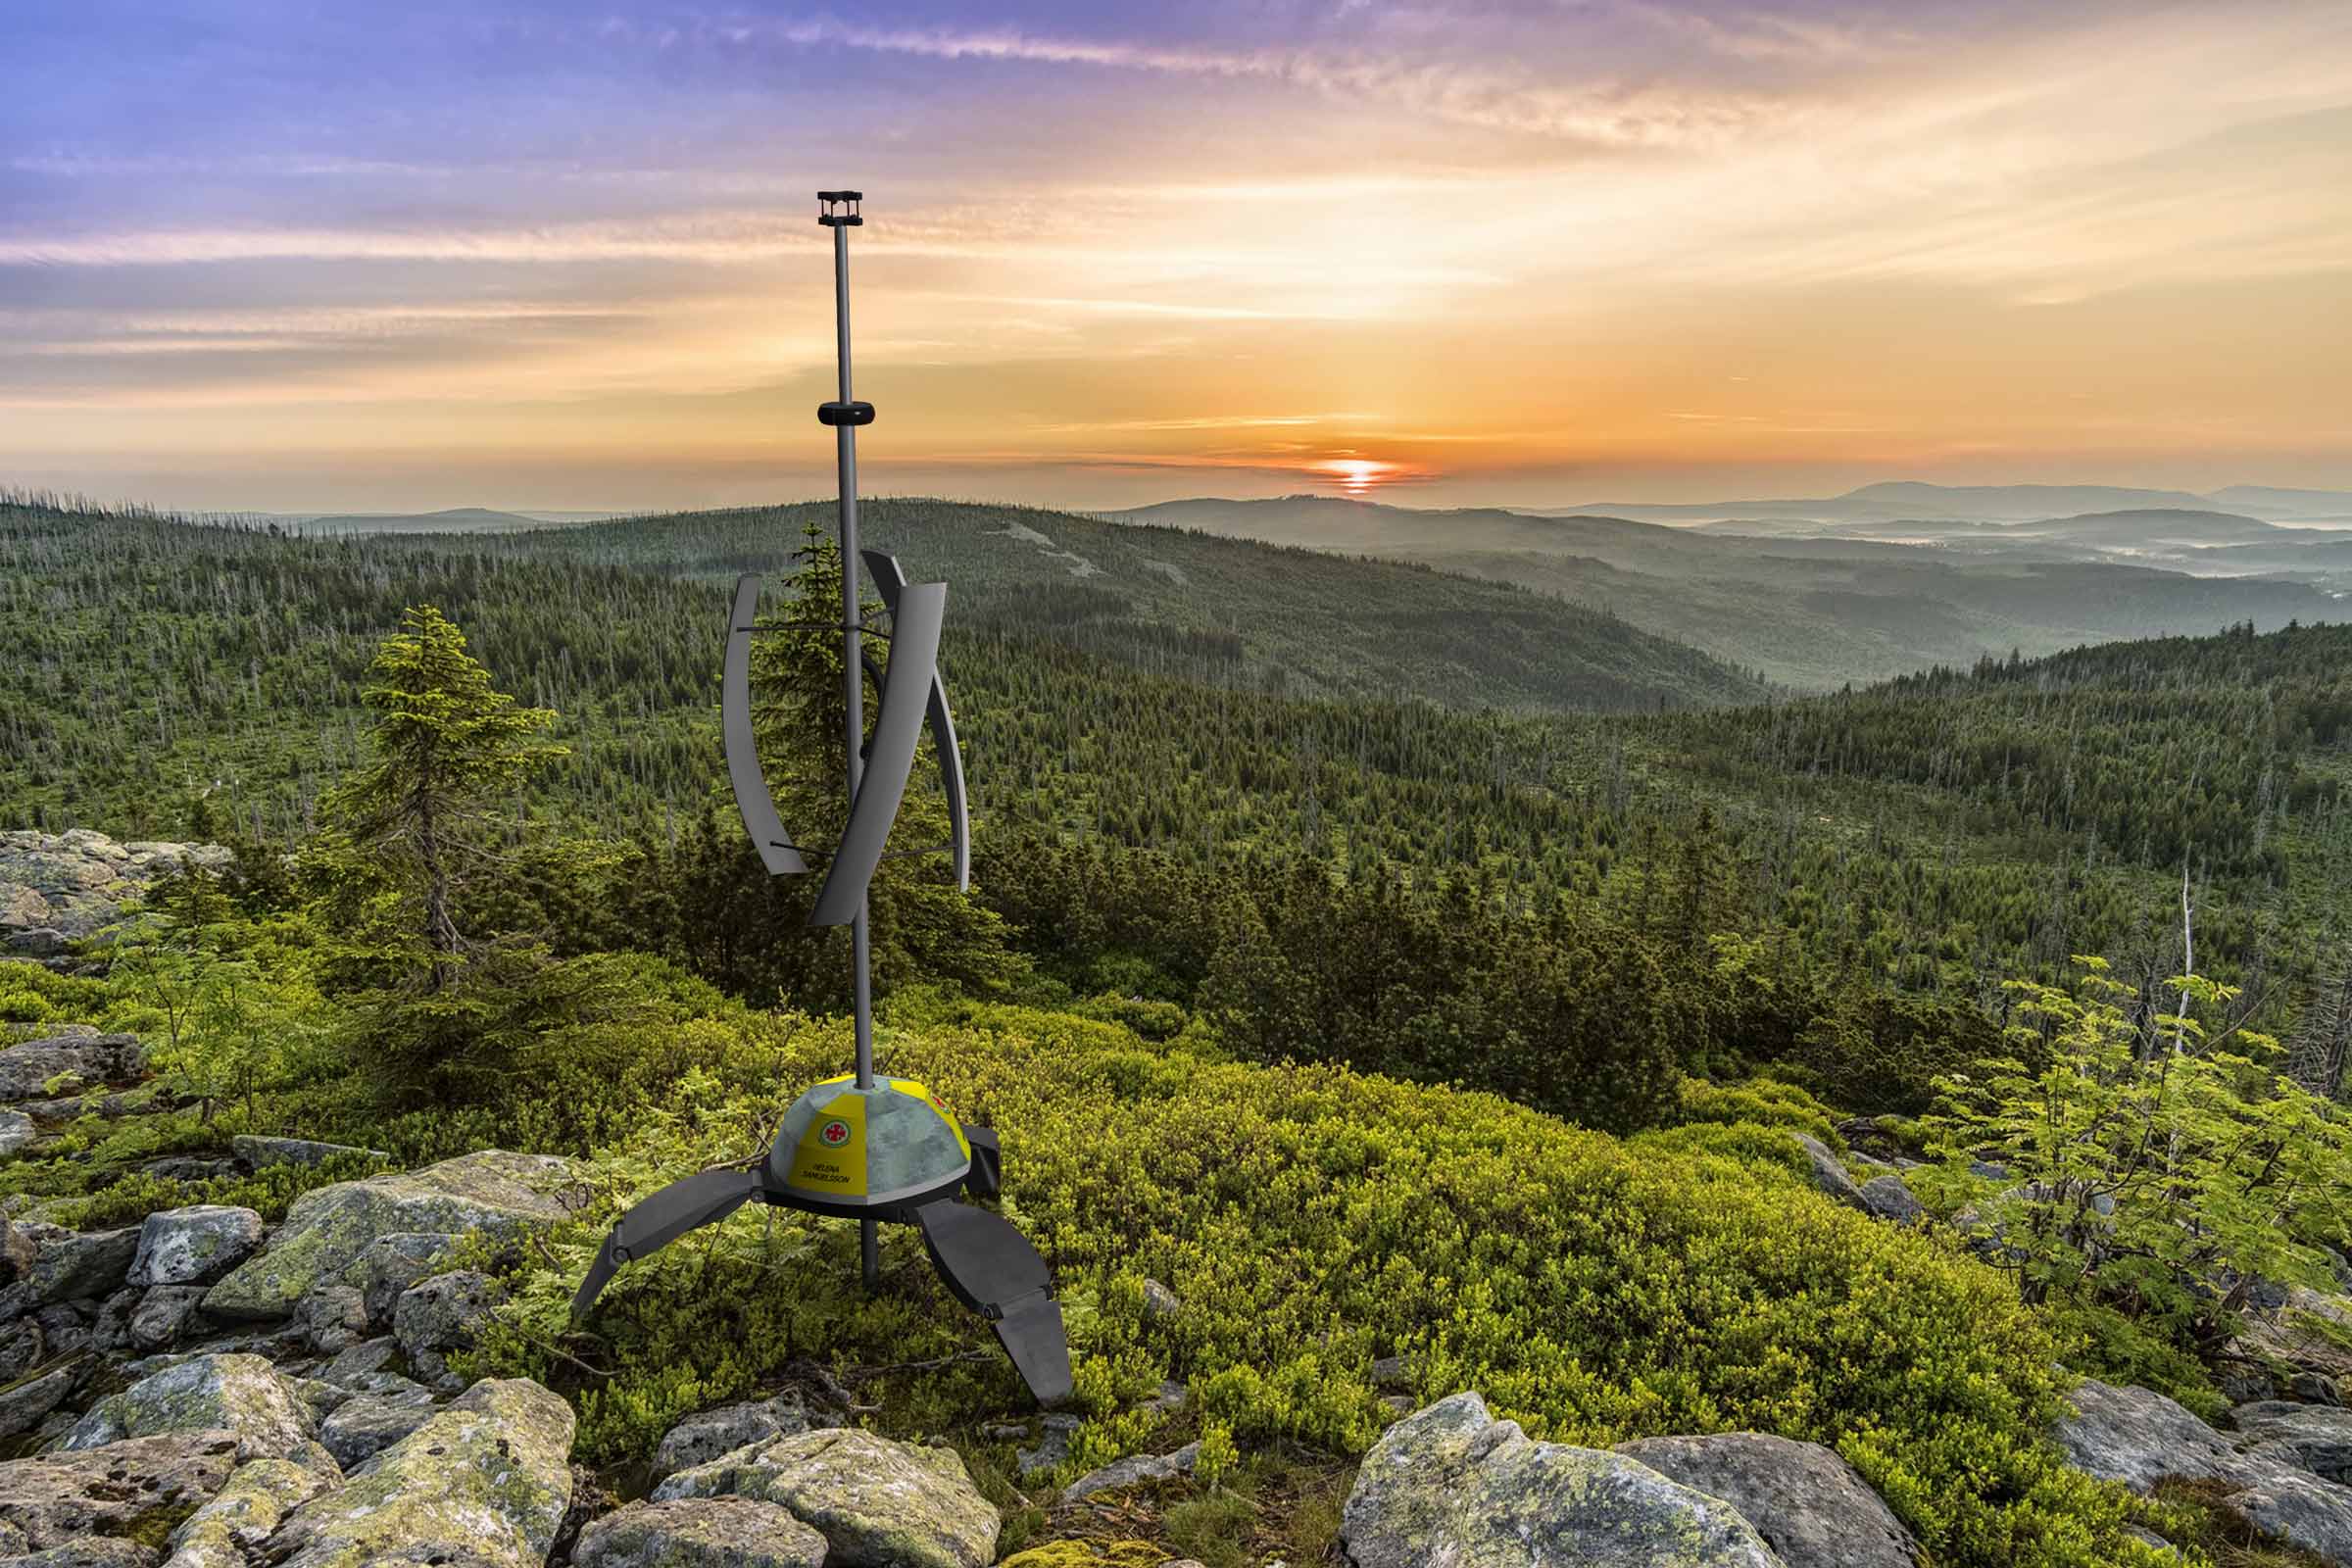 Sunlight shimmers through thin, high clouds on the distant horizon, past a forest of evergreen trees on an ancient mountain range in Sweden. In the foreground, the Njord portable weather station sits among lichen-covered boulders on its unfolded tripod, with a central mast supporting a TriSonica Mini Wind and Weather Sensor at the top.